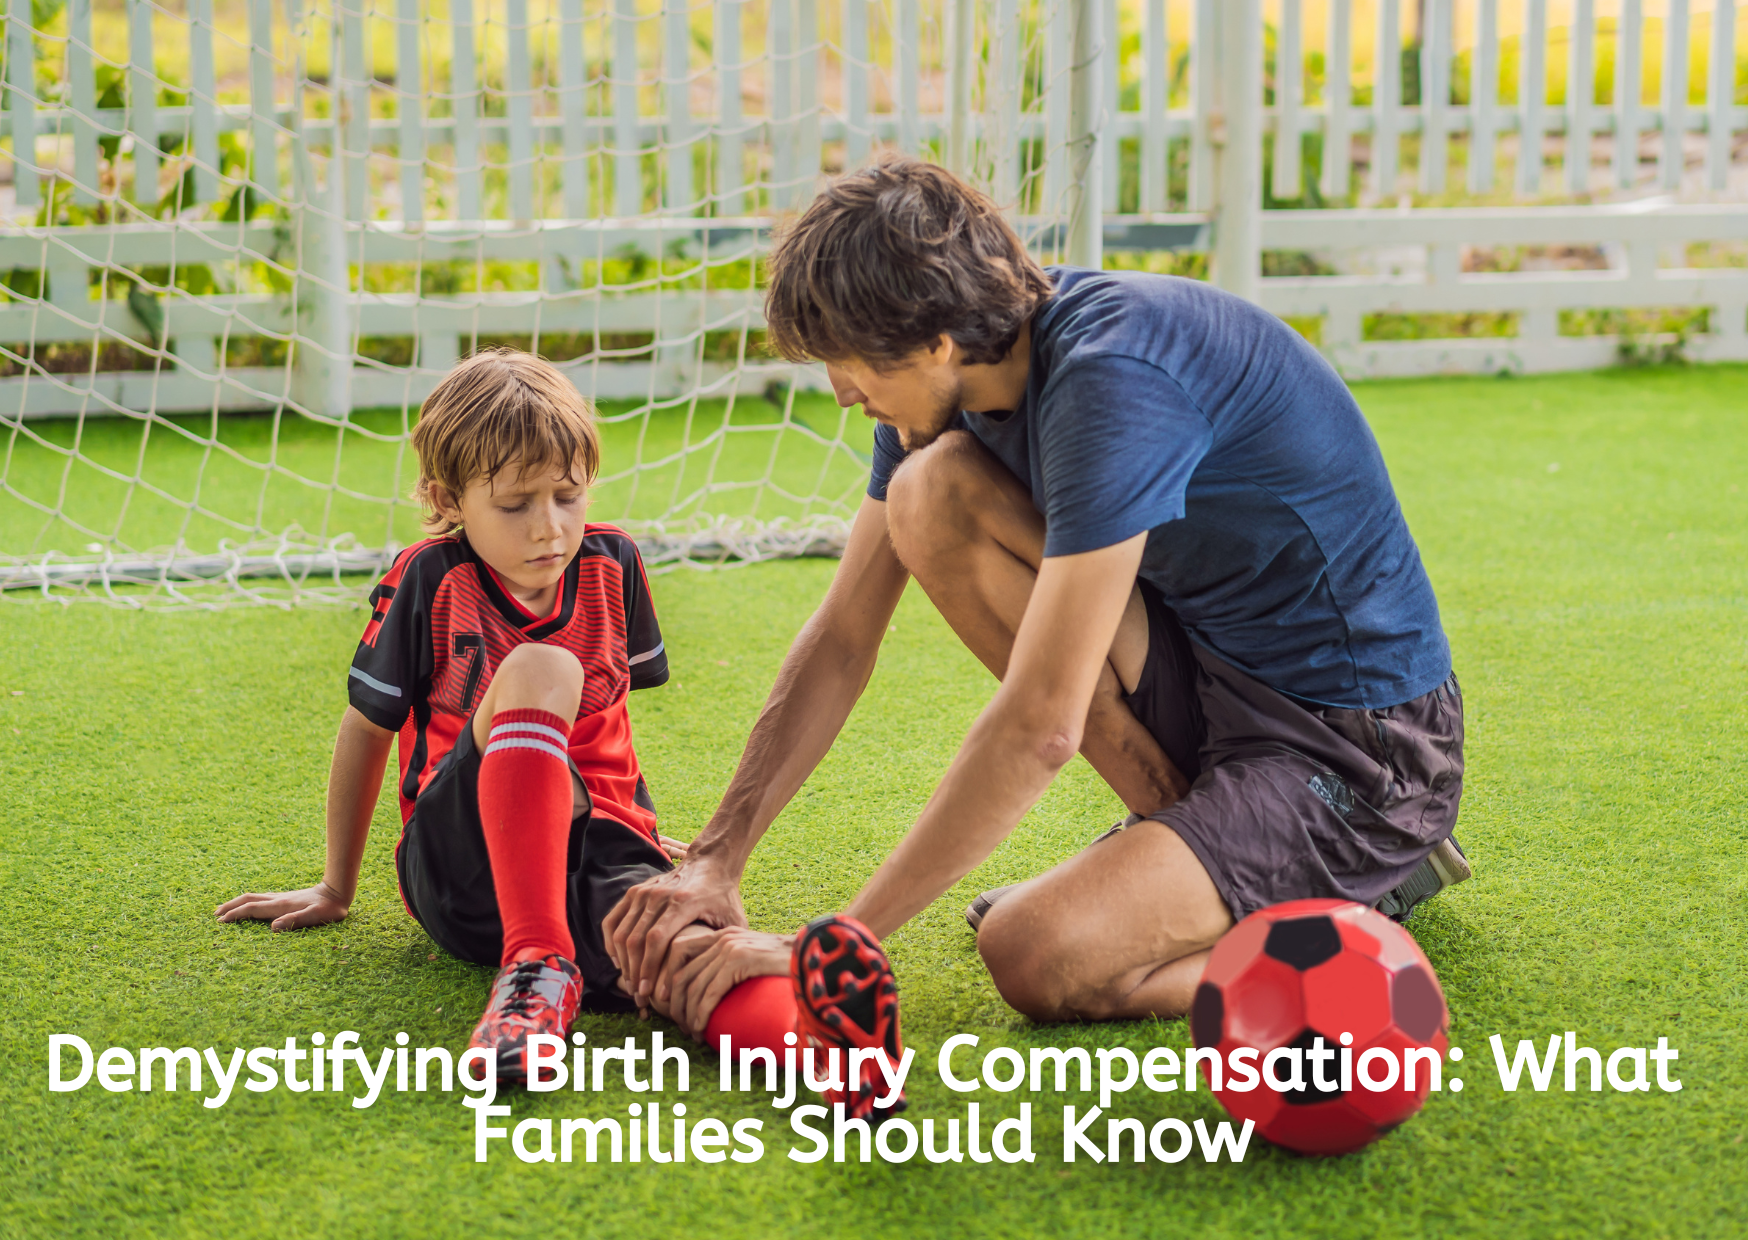 Demystifying Birth Injury Compensation: What Families Should Know